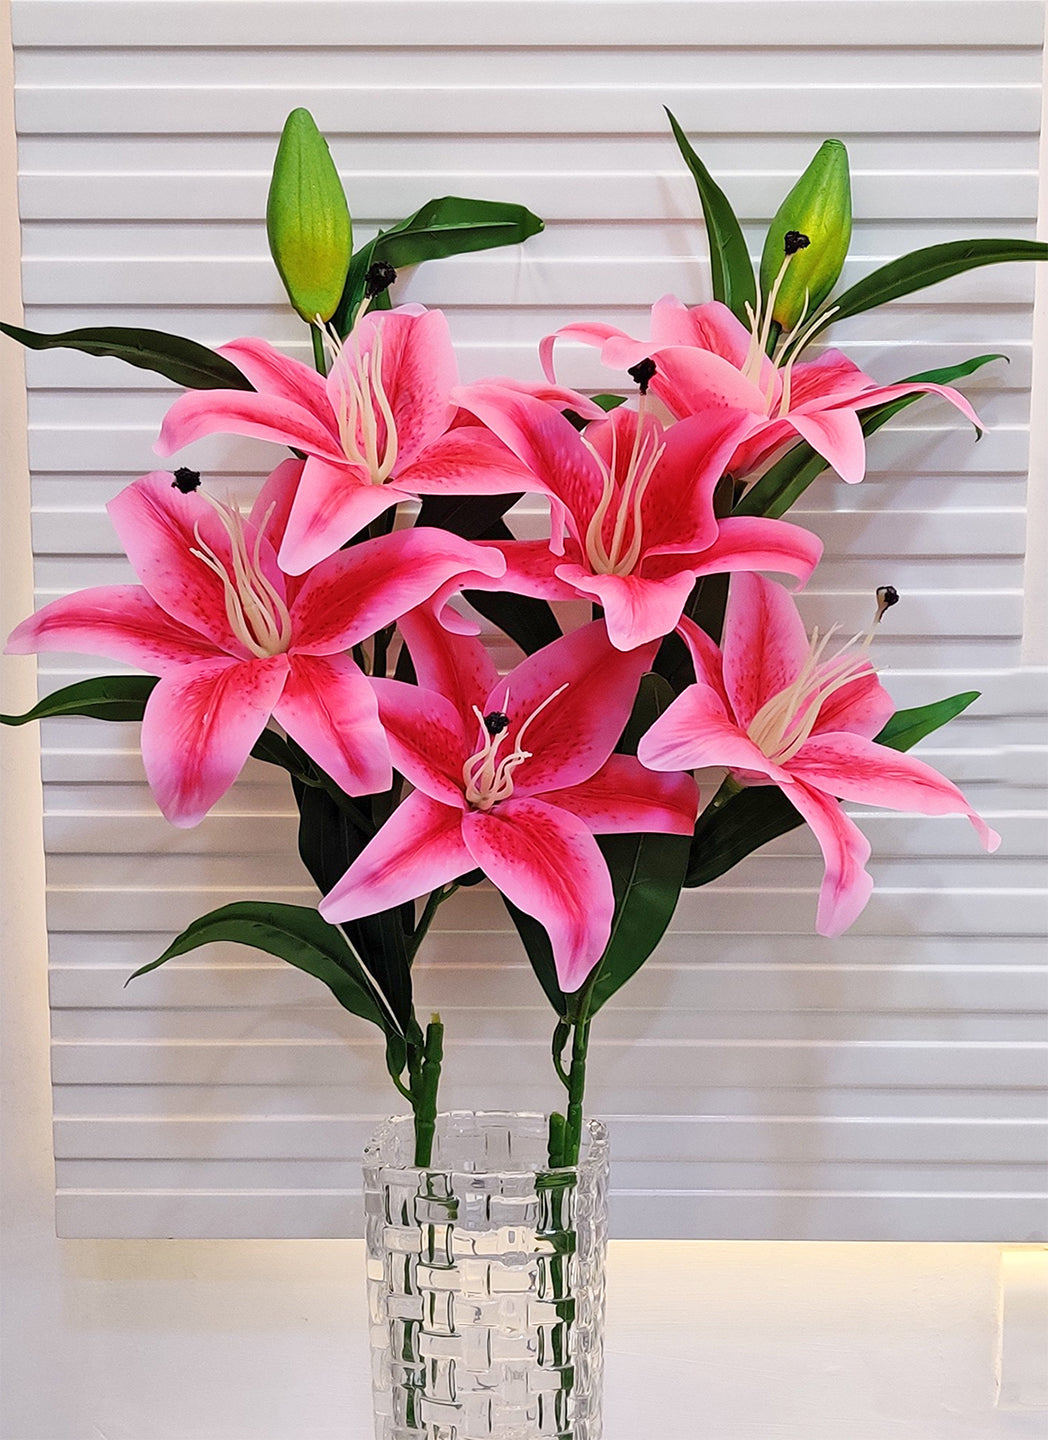 Enchanting Pink Artificial Lily Flower Stick: Timeless Elegance in Every Detail For Home Decor, Office Decor, Vae Filler, Gifting and many more, 3 Big flowers, 100 CM Long